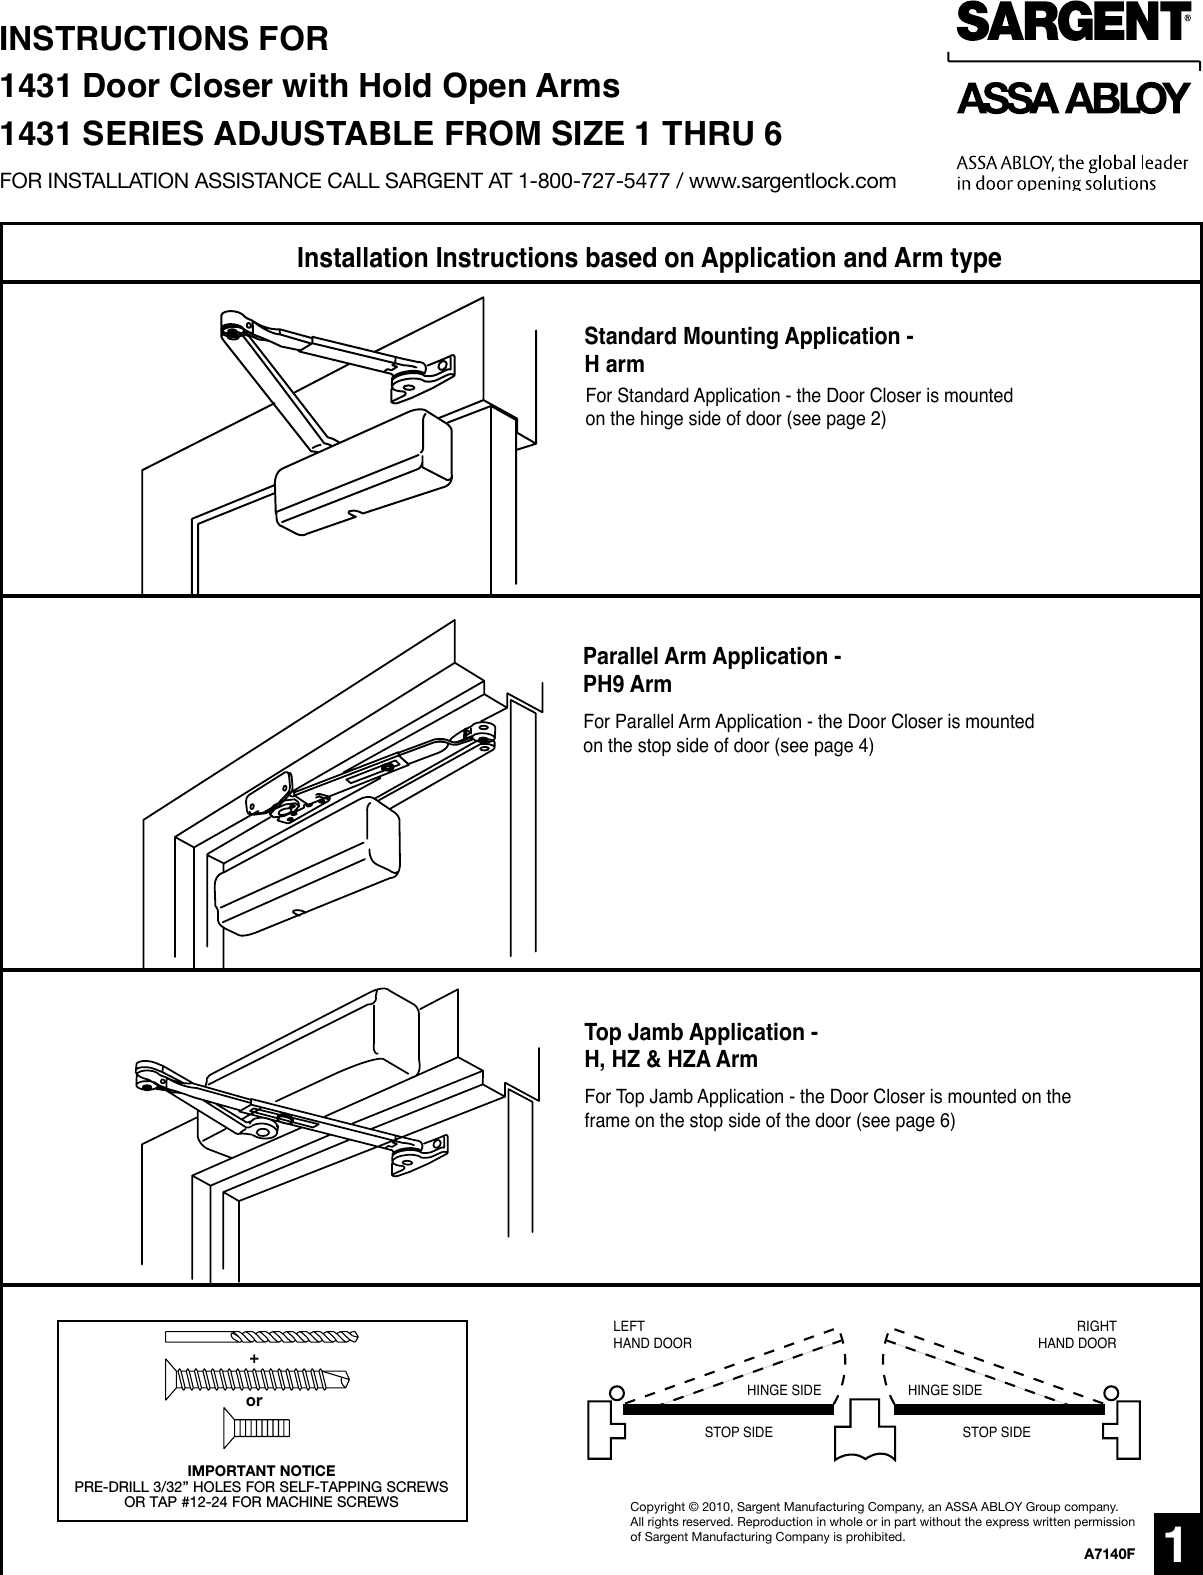 sargent-instructions-for-installing-1431-series-door-closers-with-hold